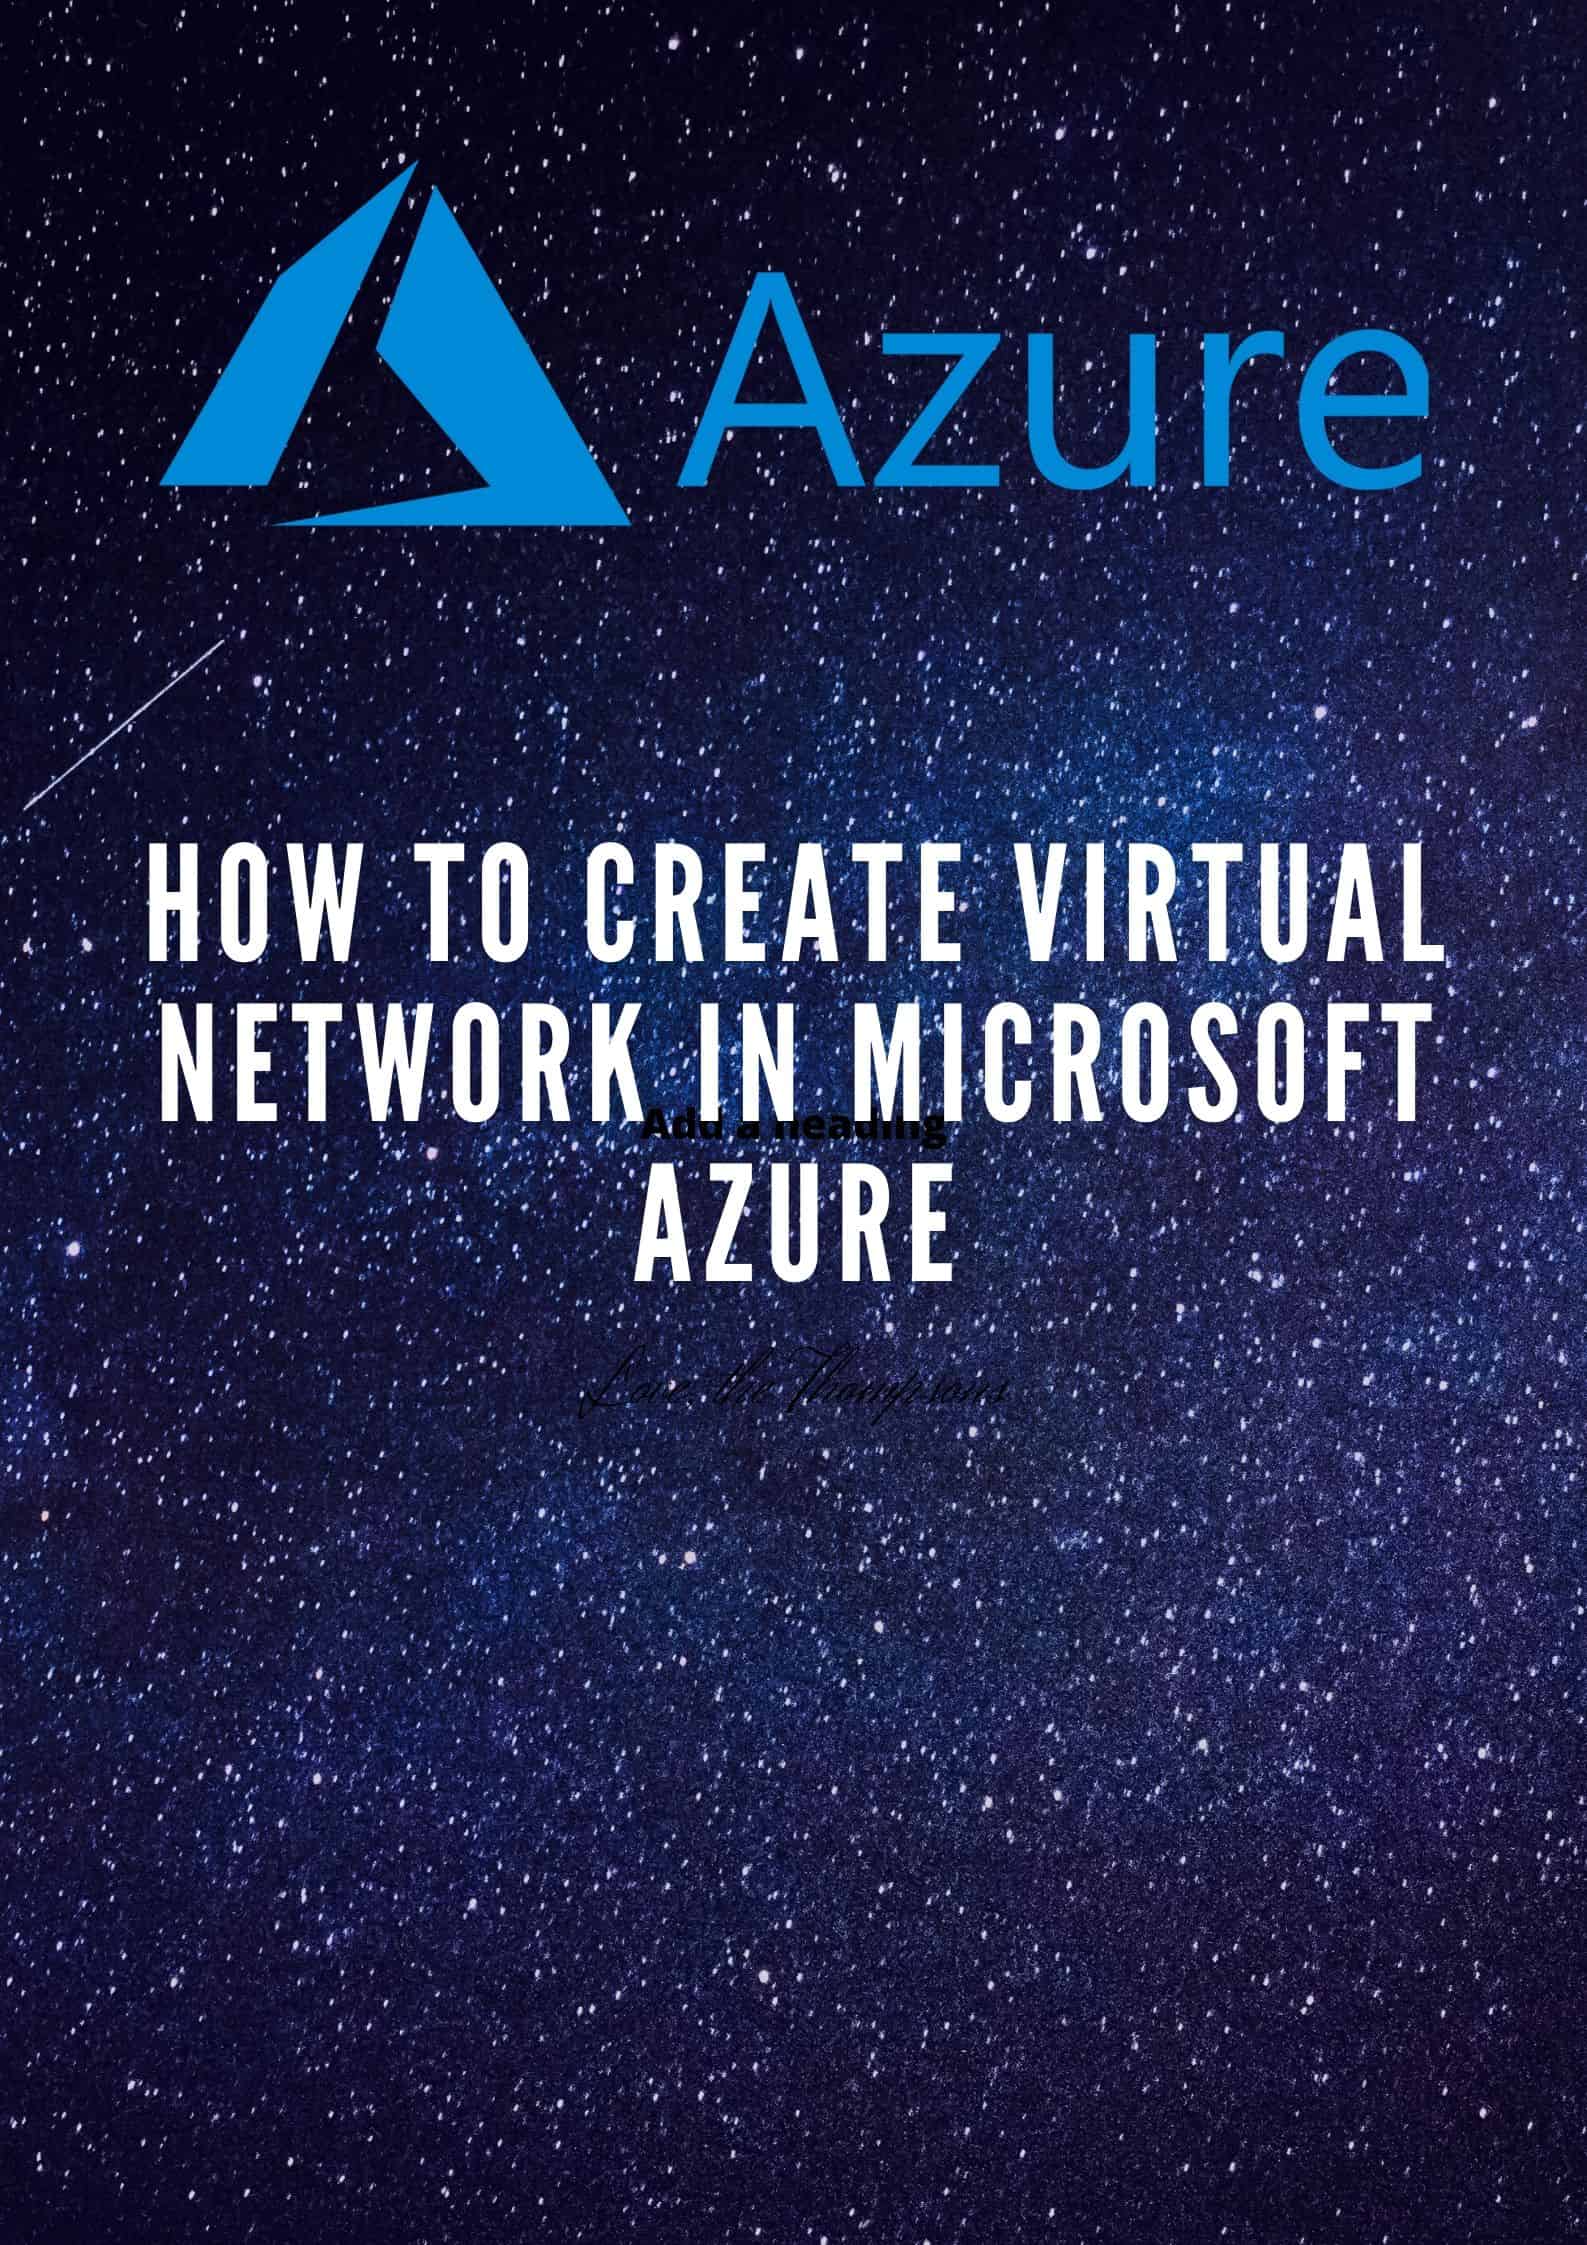 How to Create Virtual Network in Microsoft Azure in 2020